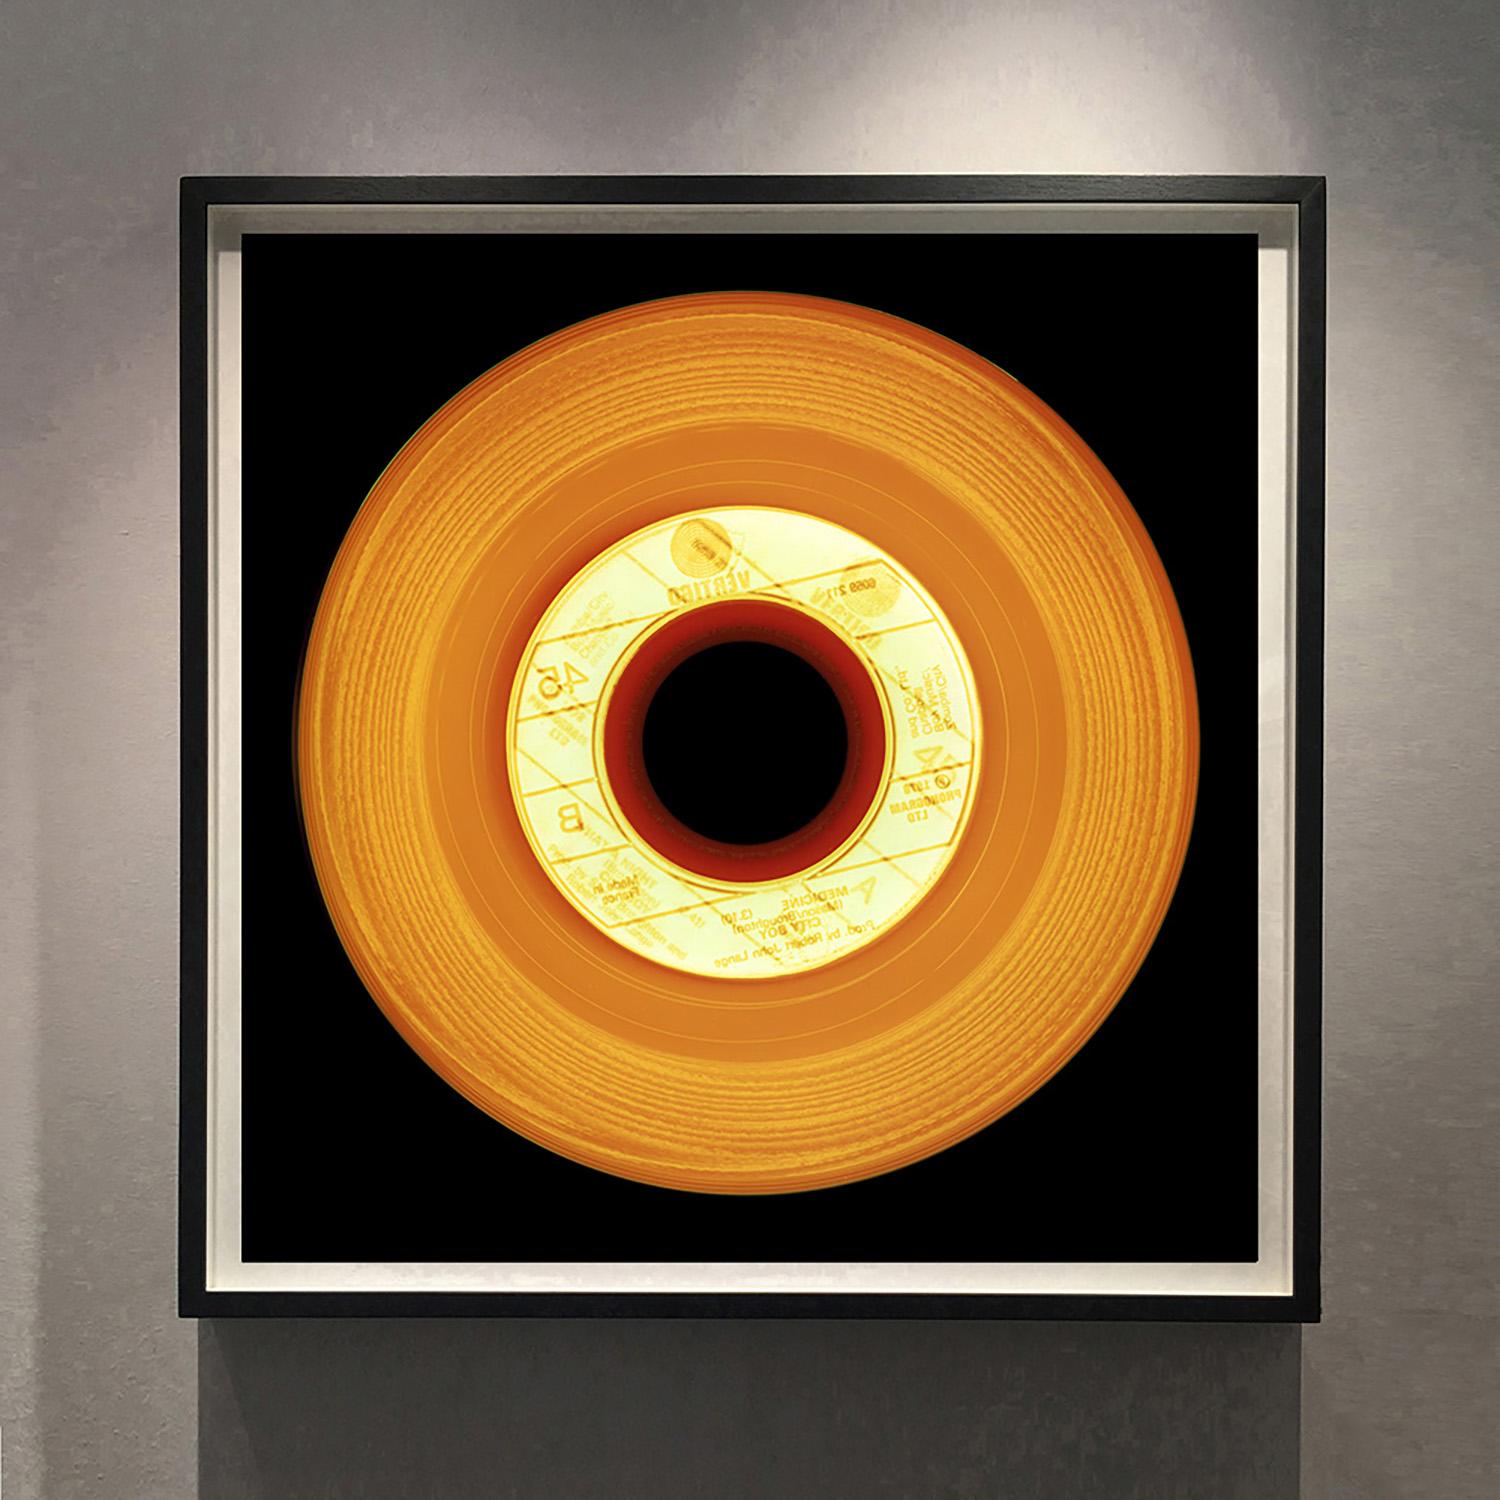 Vinyl Collection 'Made in France' - Orange Pop art color photograph - Photograph by Heidler & Heeps